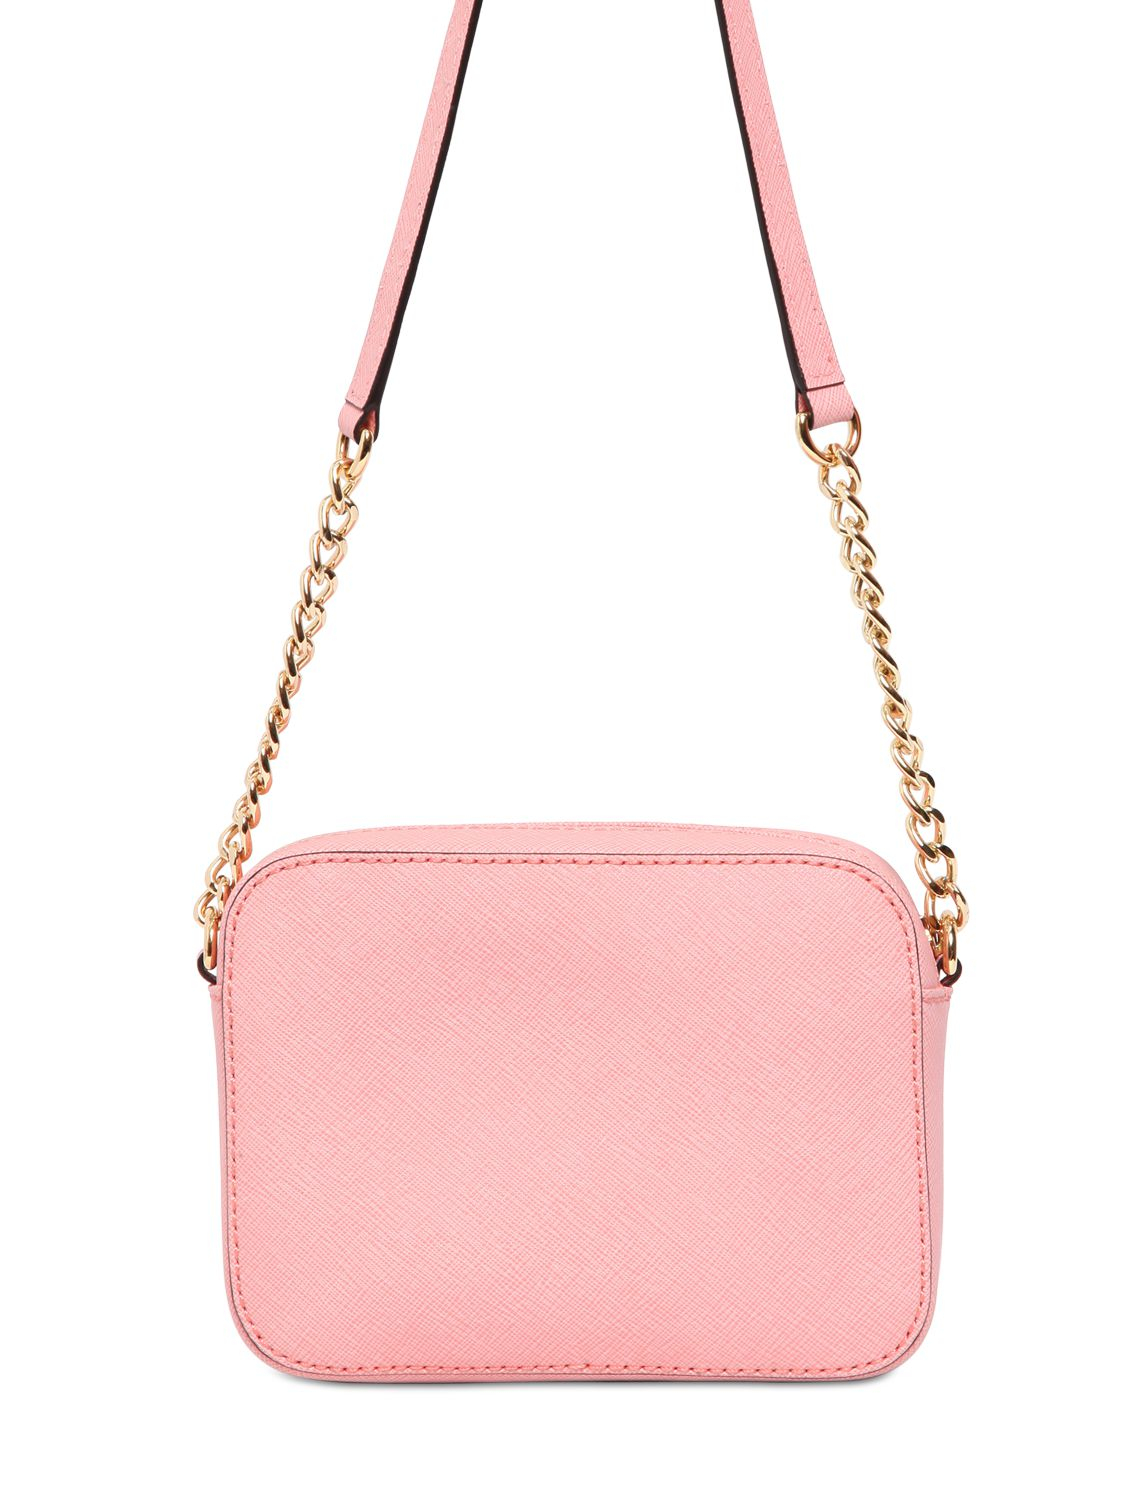 MICHAEL Michael Kors Jet Set Chain Saffiano Leather Bag in Light Pink (Pink) - Lyst